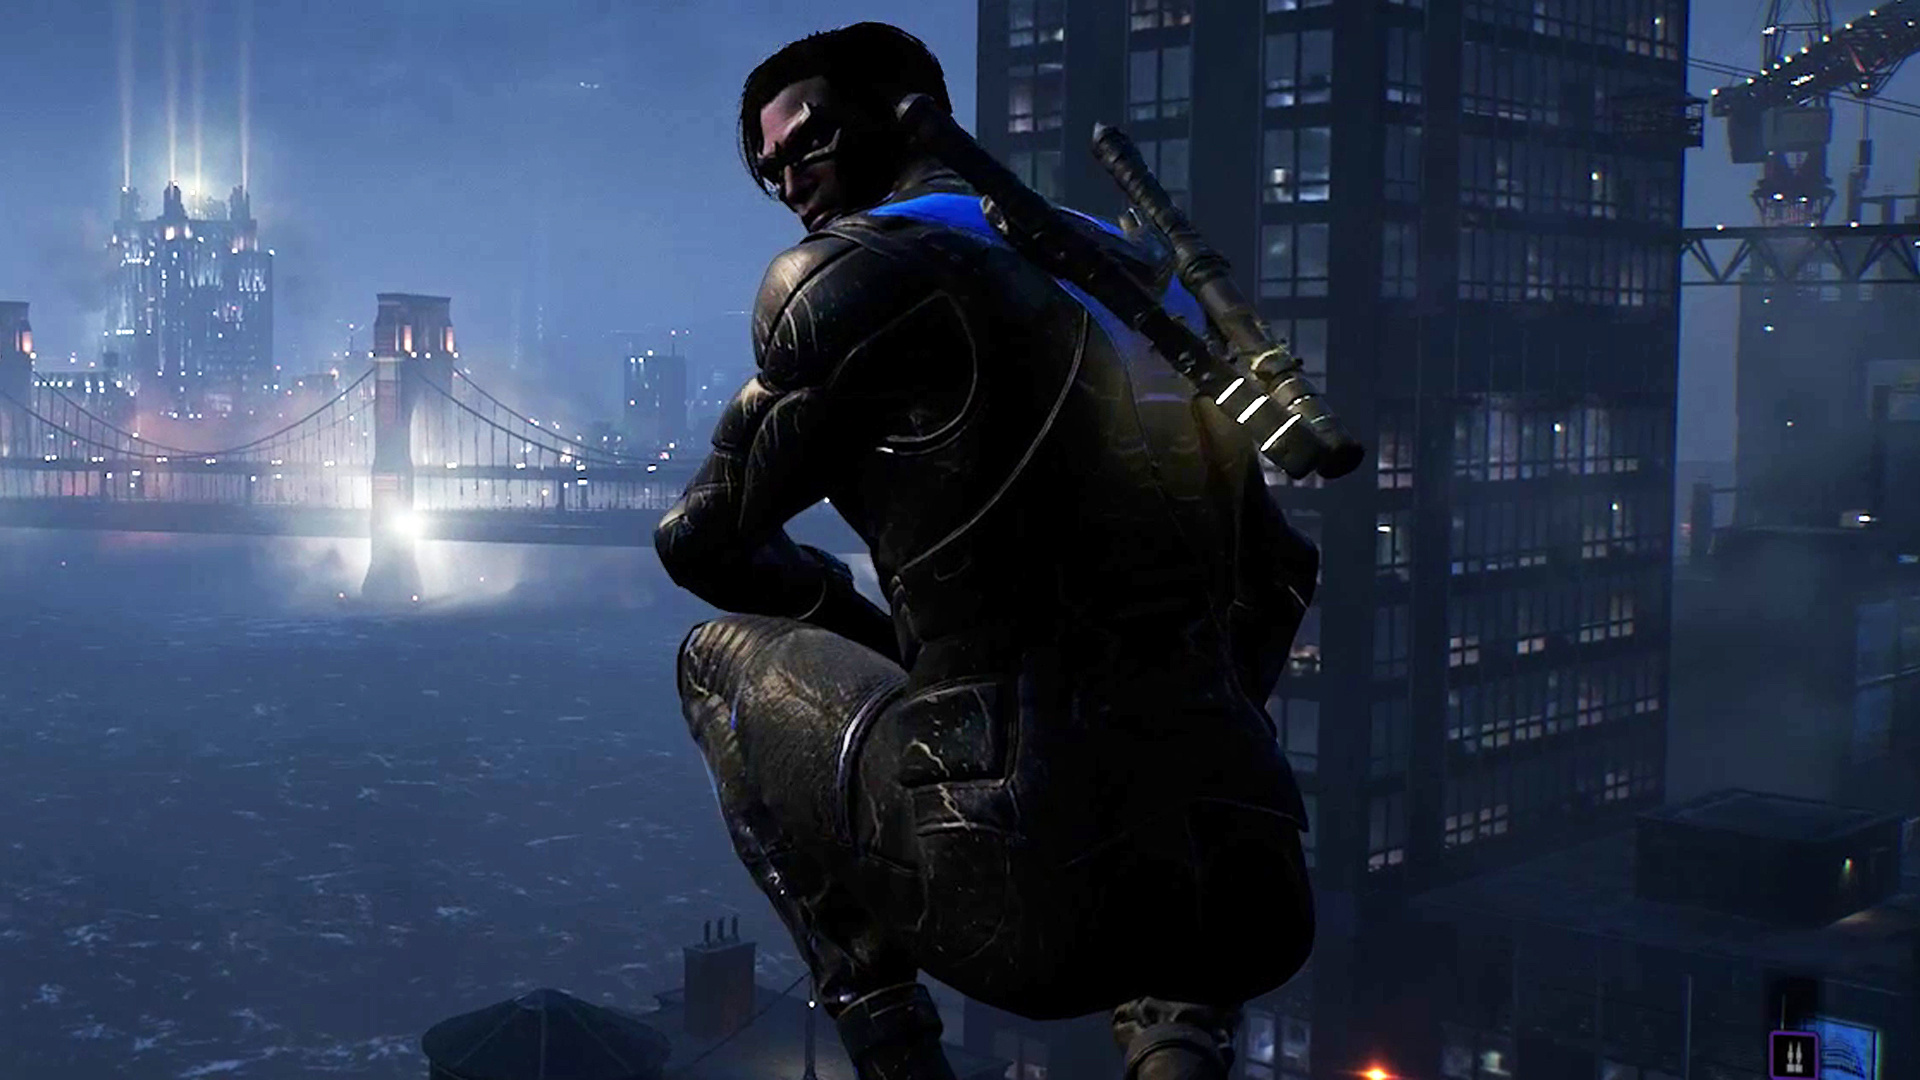 Gotham Knights (Game): Nightwing, Dick Grayson, The first-ever iteration of Robin. 1920x1080 Full HD Background.